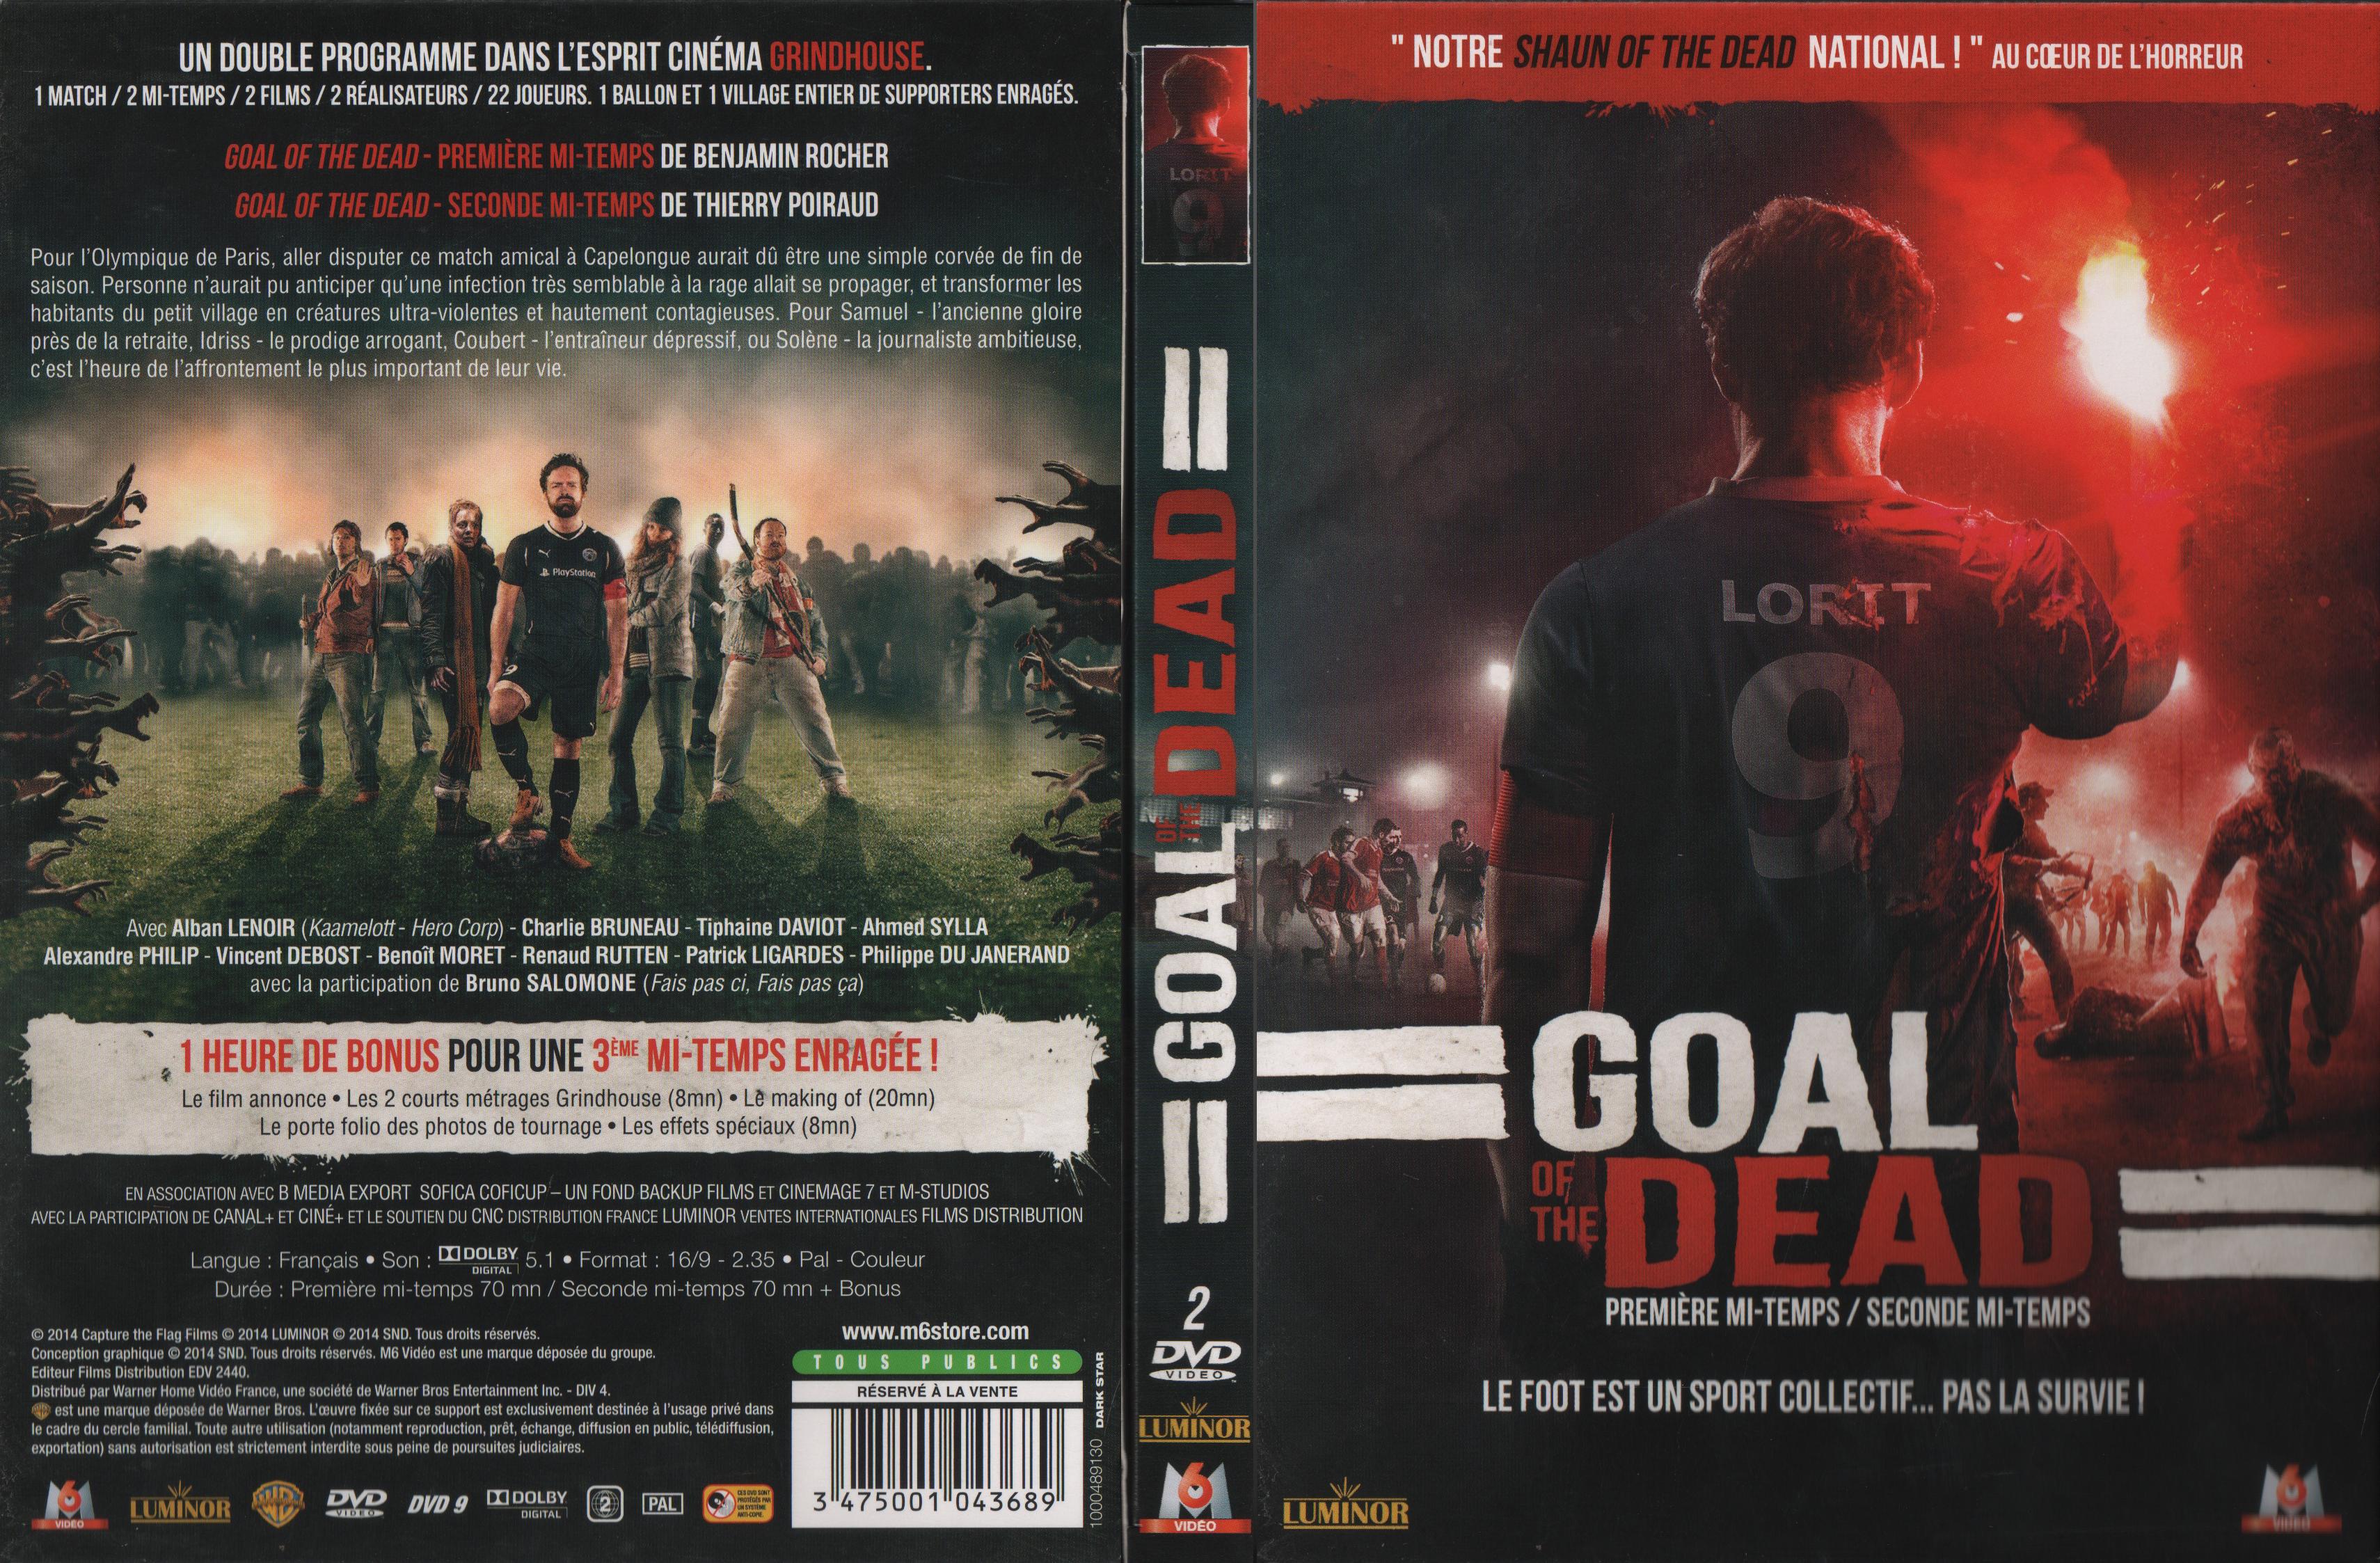 Jaquette DVD Goal of the dead